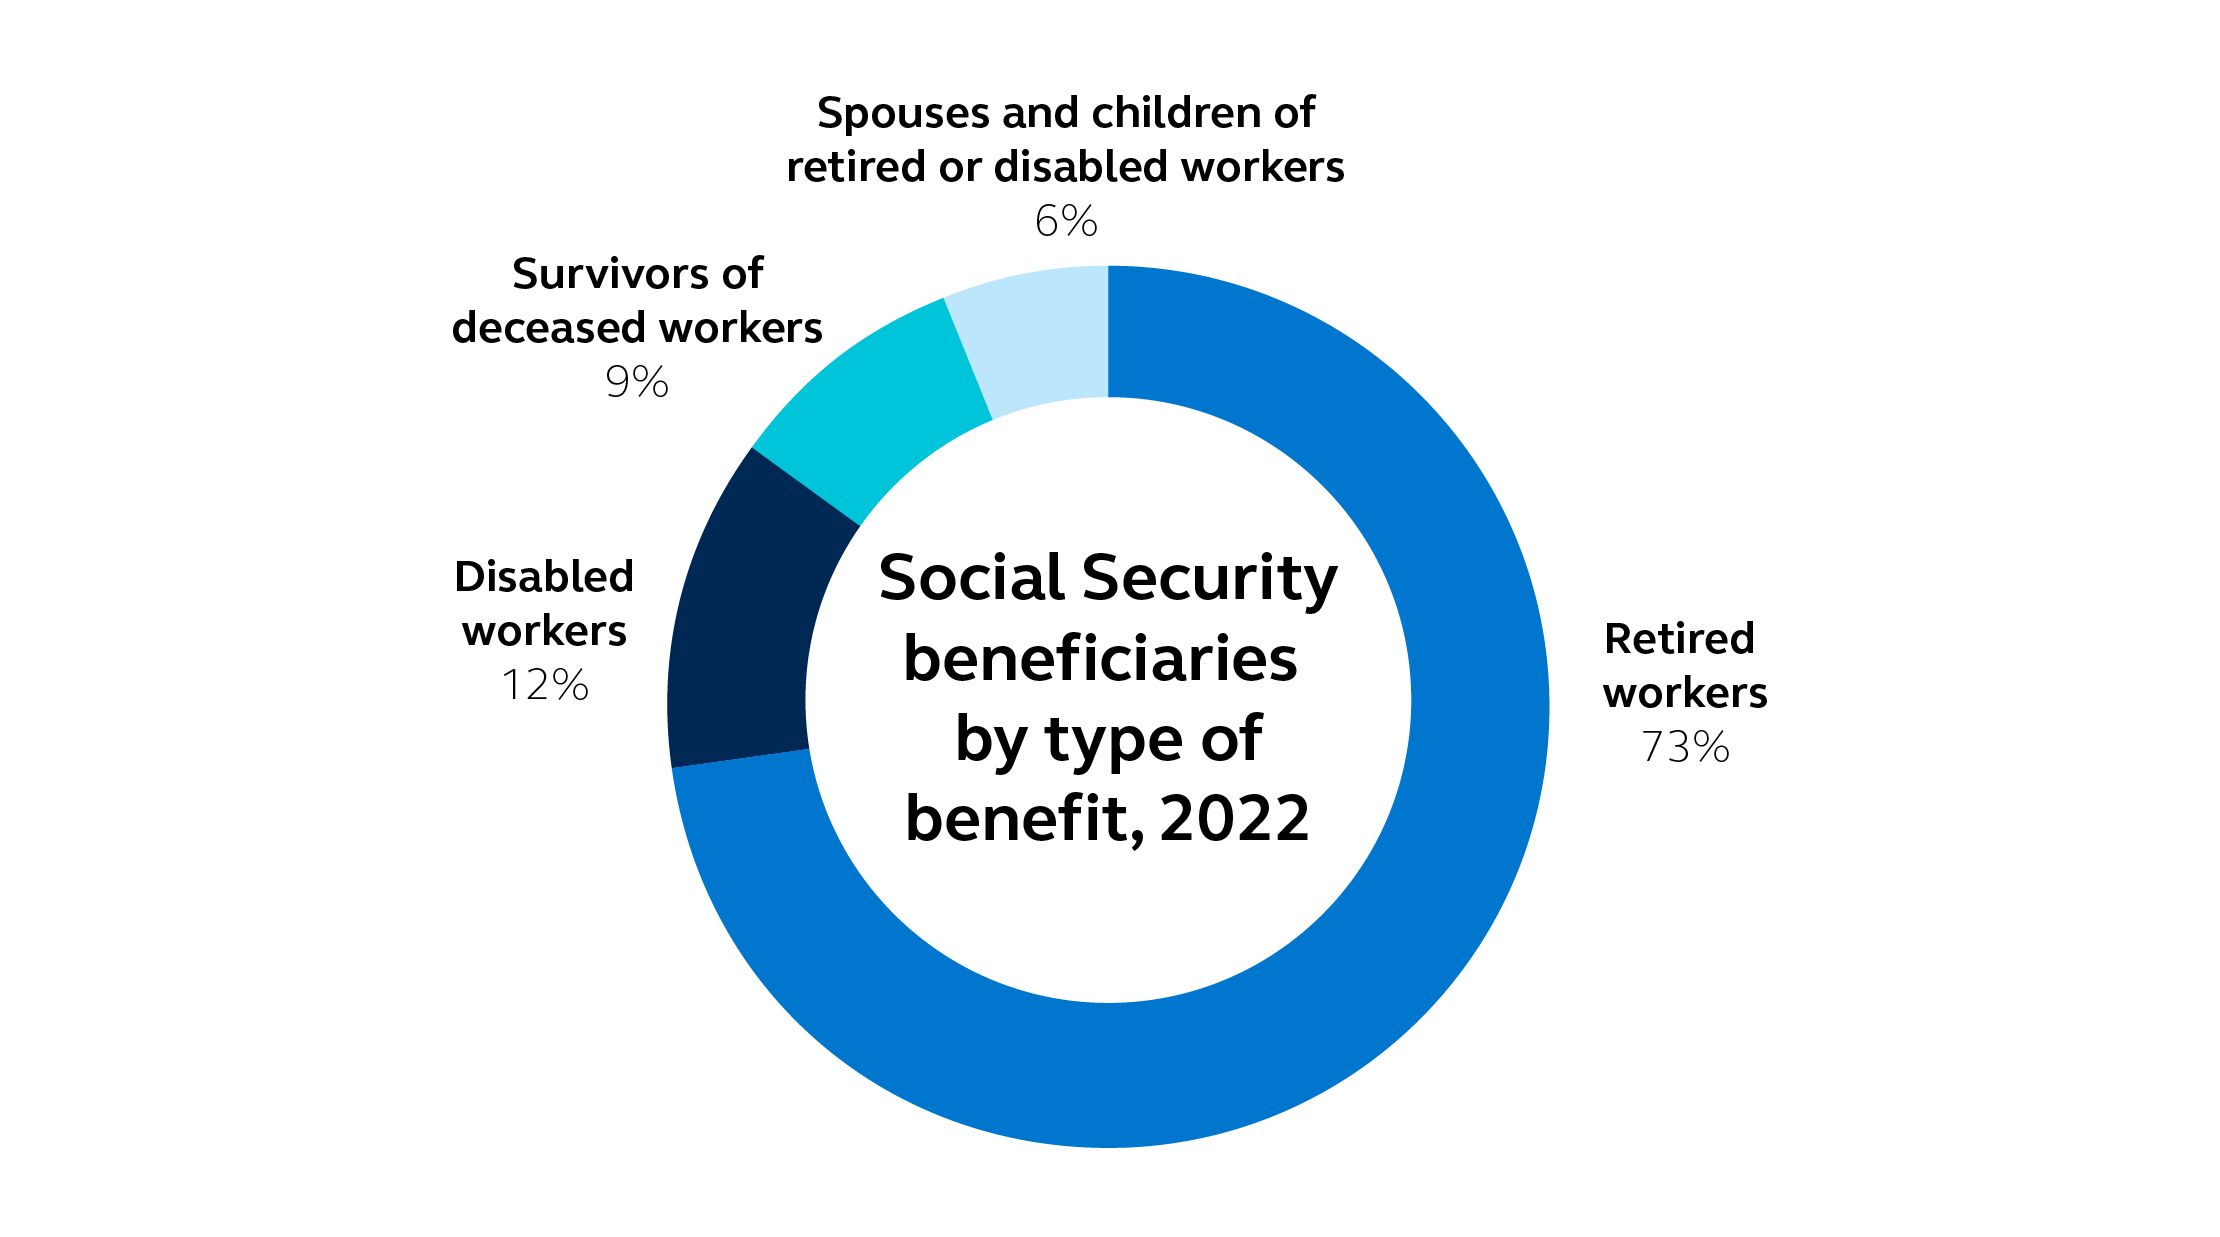 Chart showing social security beneficiaries by type of benefit, 2022.